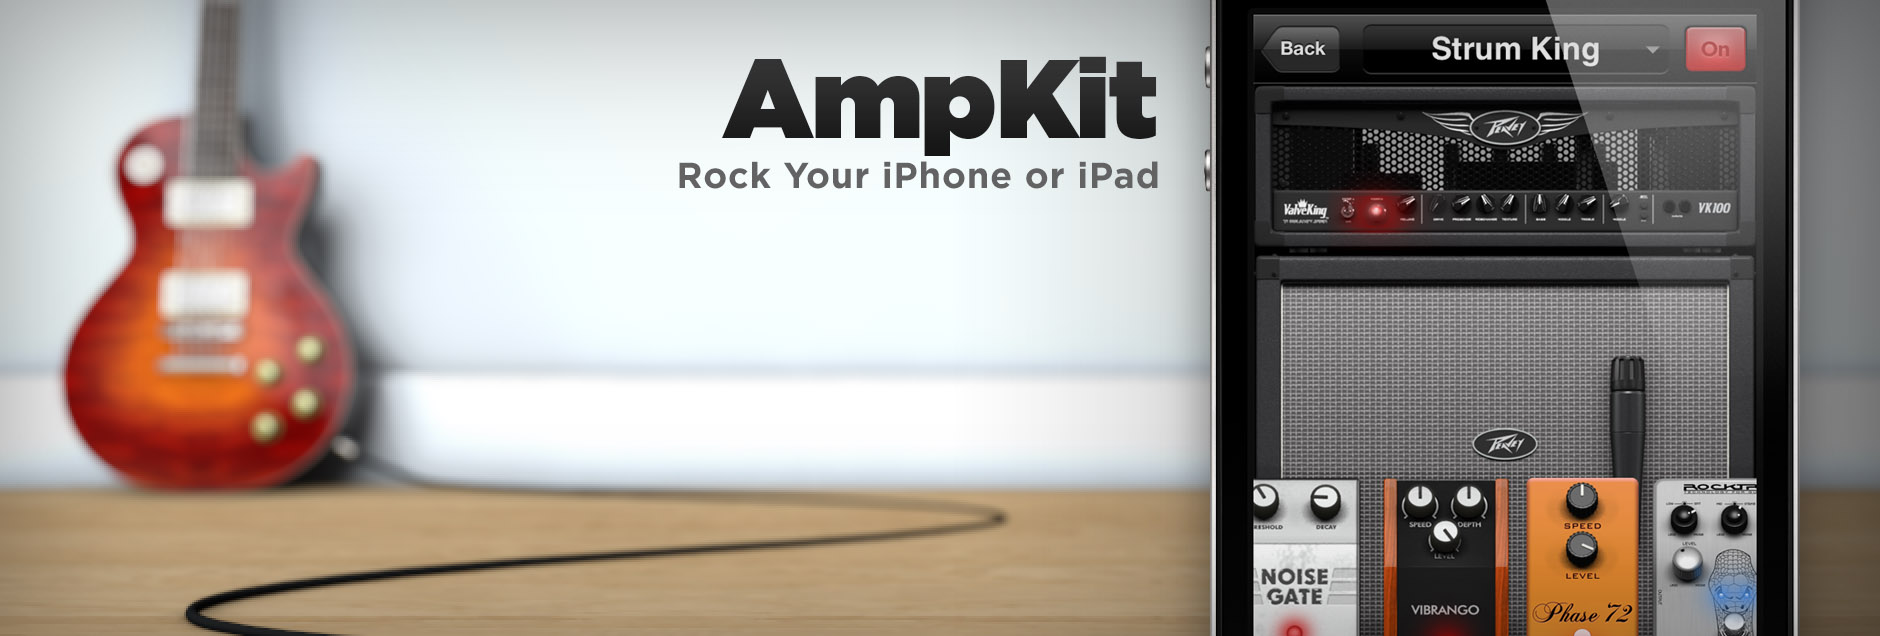 AmpKit feature image